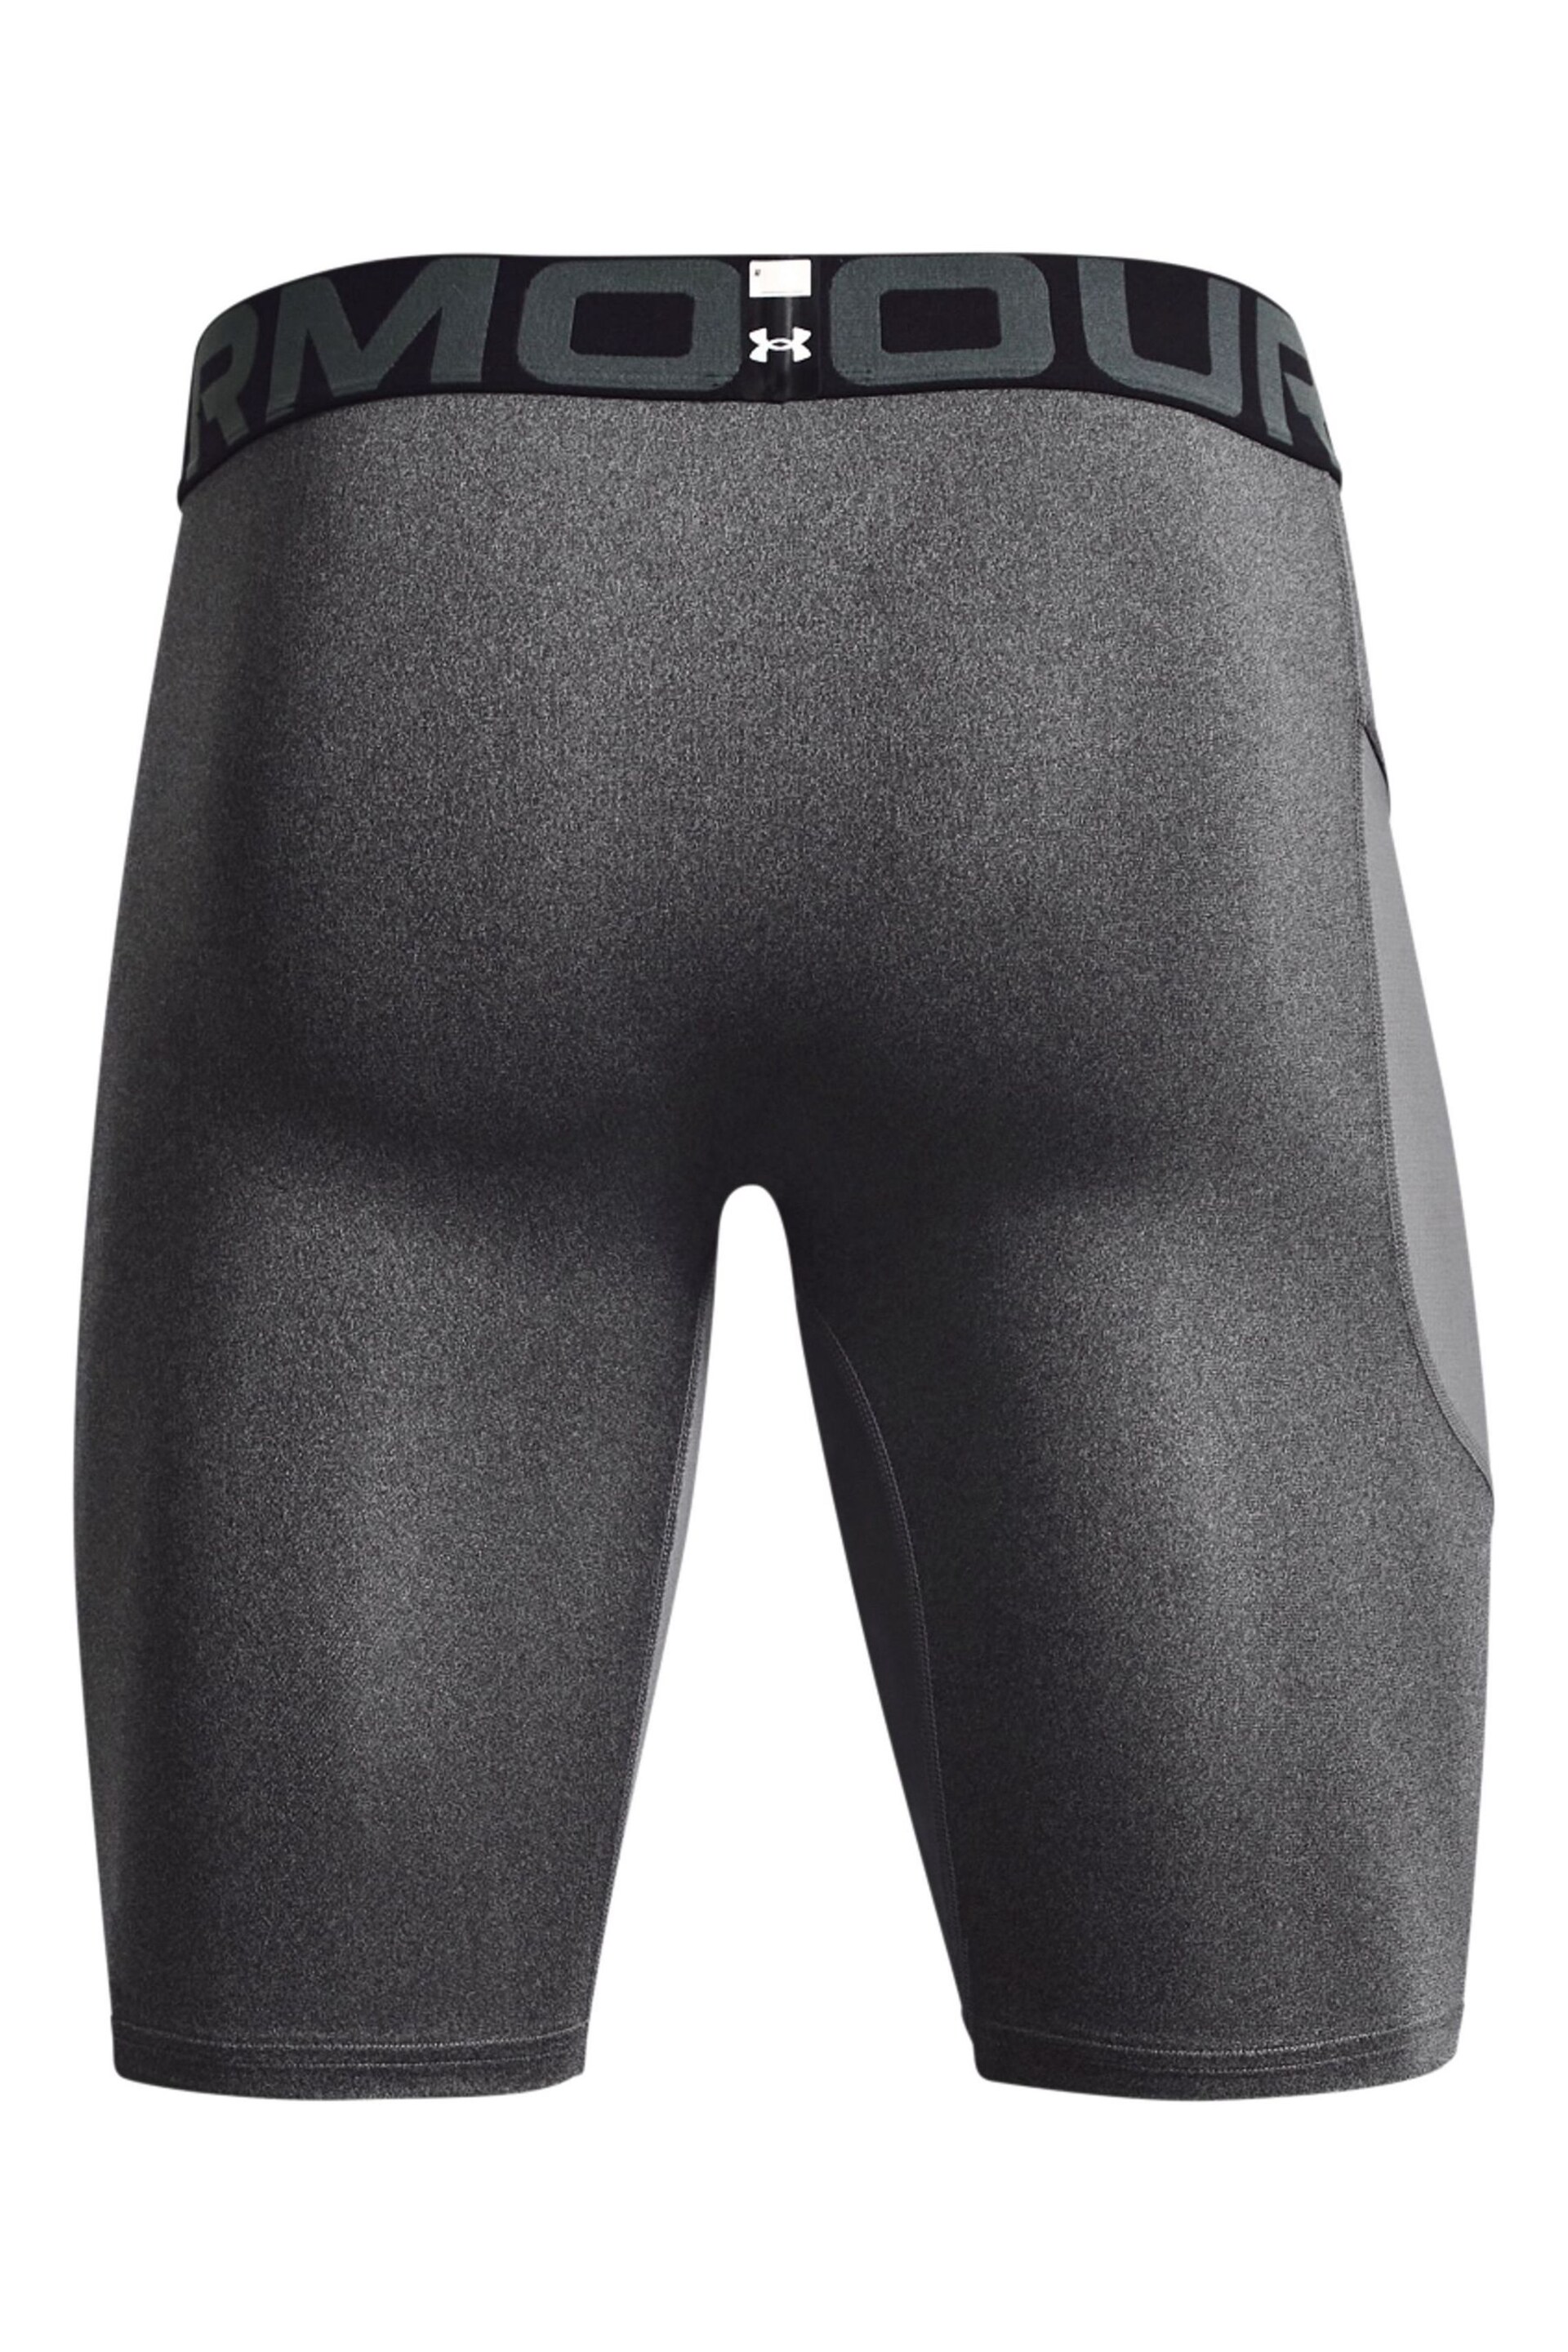 Under Armour Grey Heat Gear Armour Long Shorts - Image 8 of 8